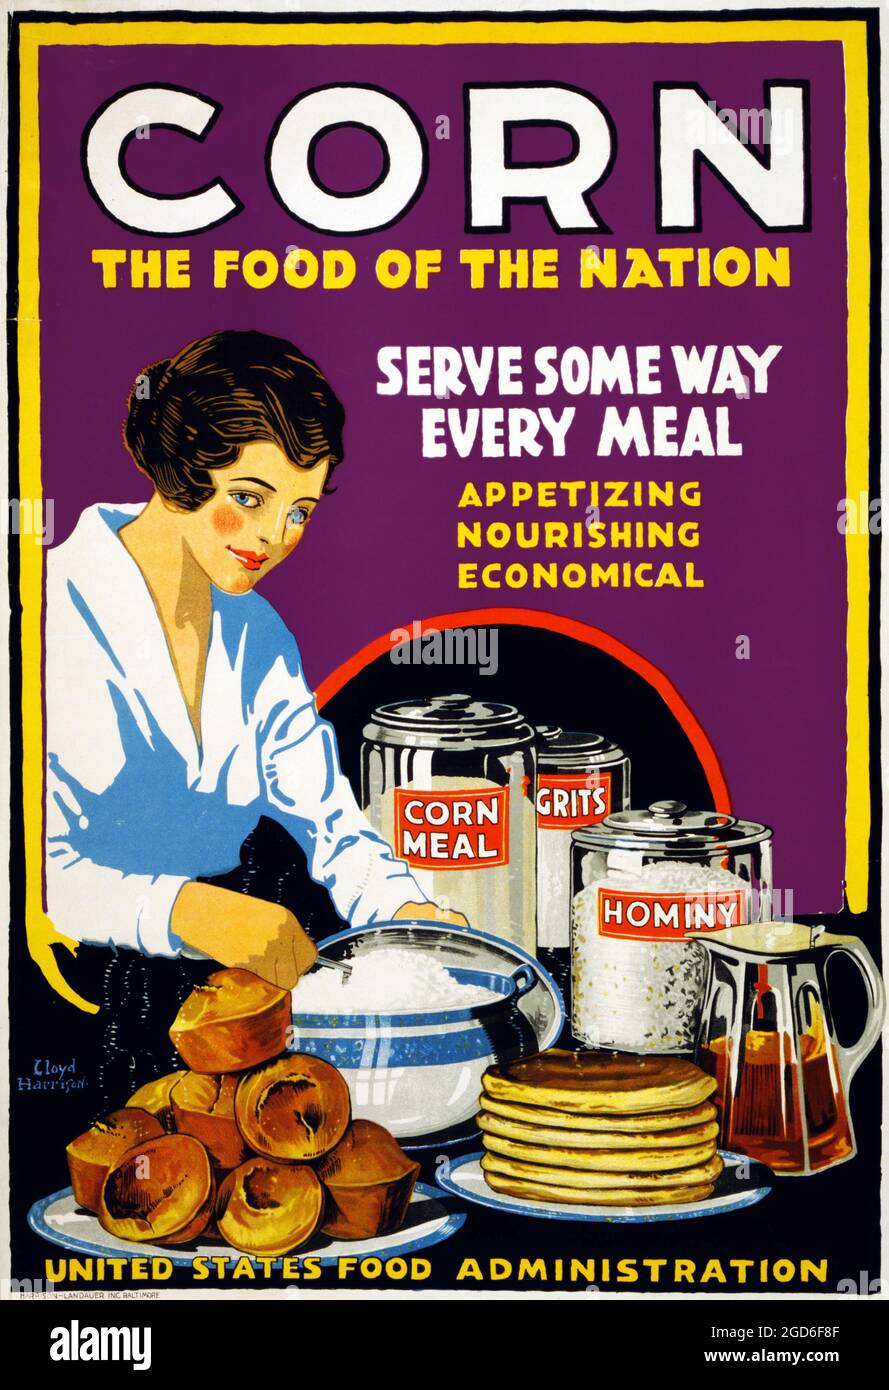 Old and vintage advertisement / poster. Corn, the food of the nation, US Food Administration poster, 1918. Stock Photo